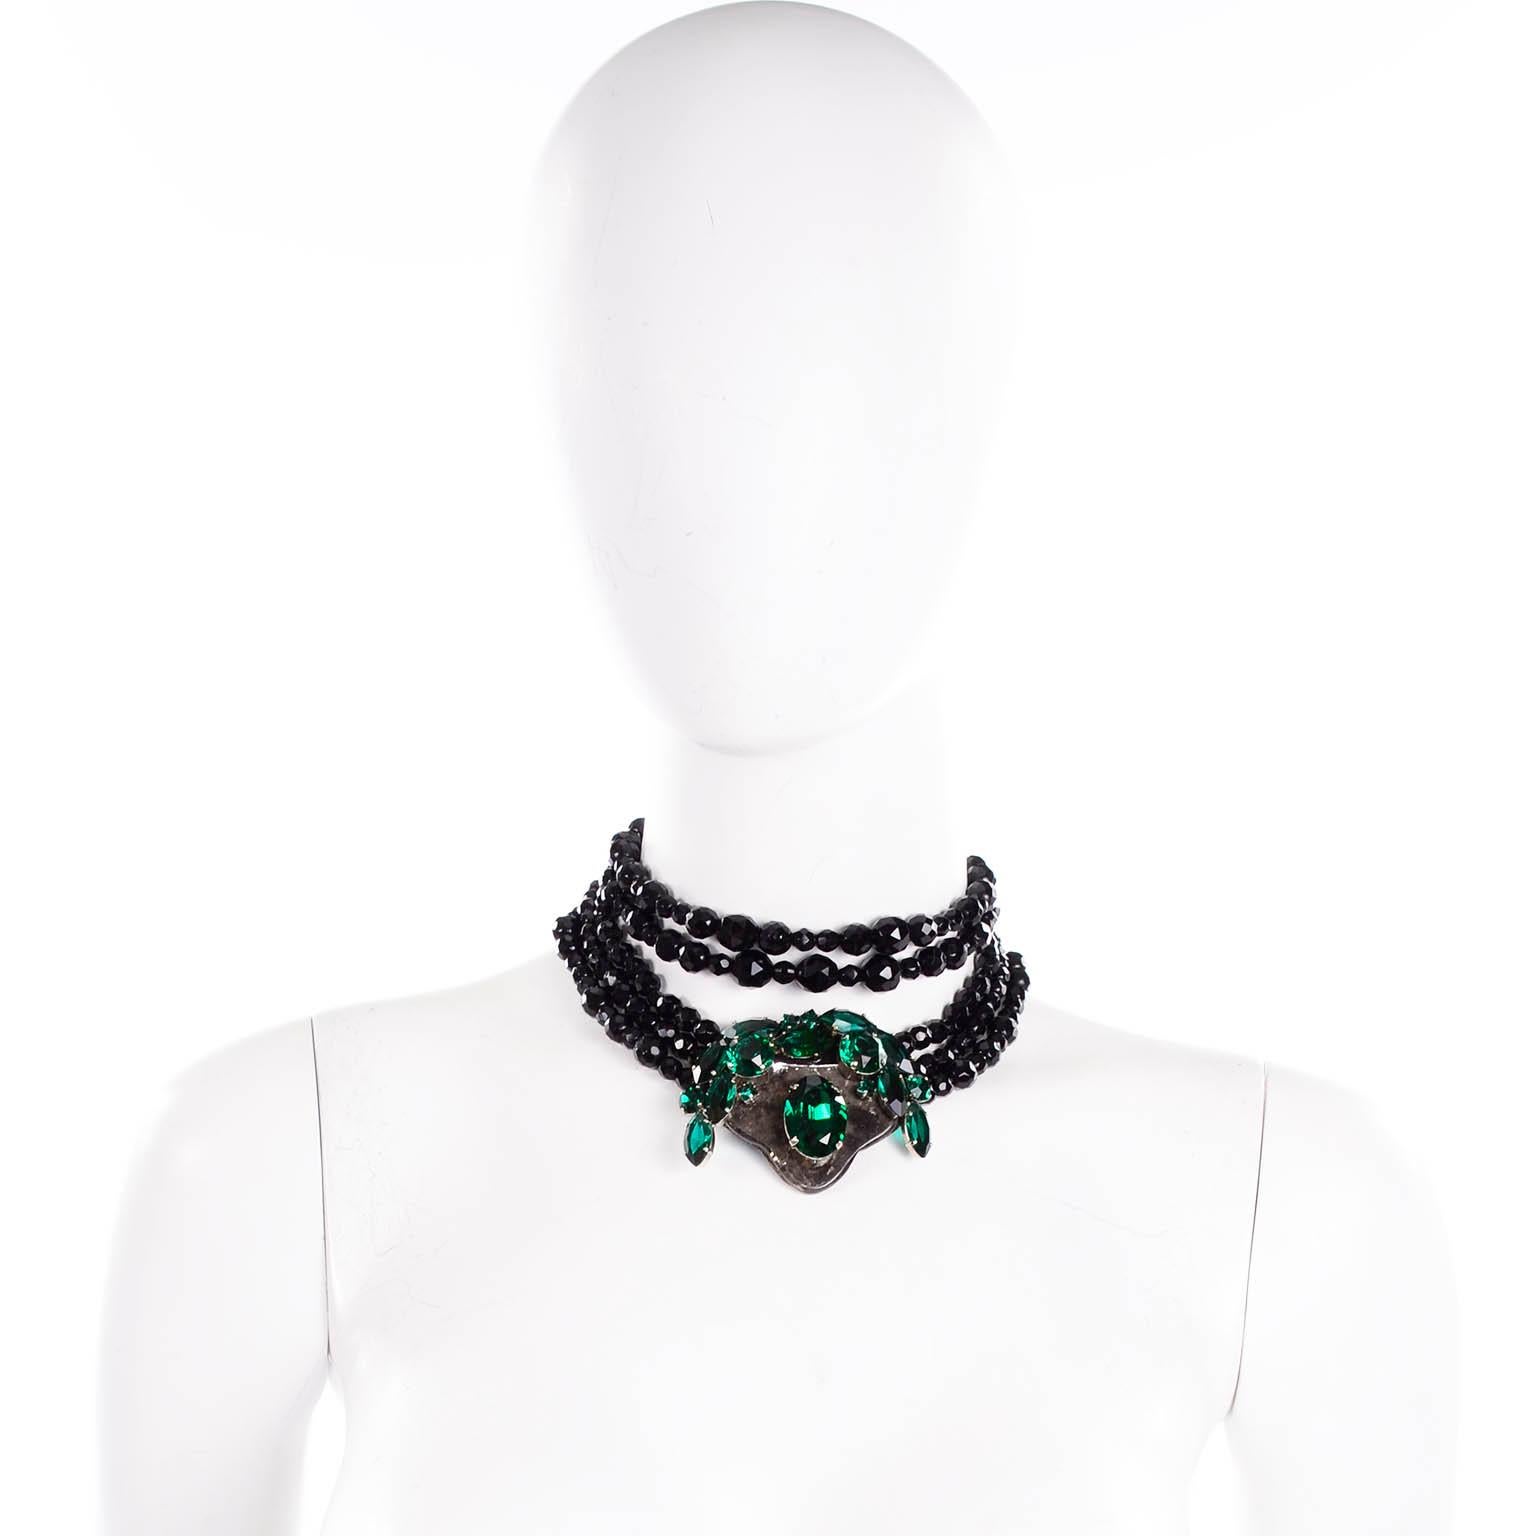 This is a dramatic vintage beaded faceted glass cabochon necklace by Emanuel Ungaro Couture inspired by Mughal jewelry. It has multiple strands of alternating sizes of faceted black beads leading to a central pendant with large green stones. Two